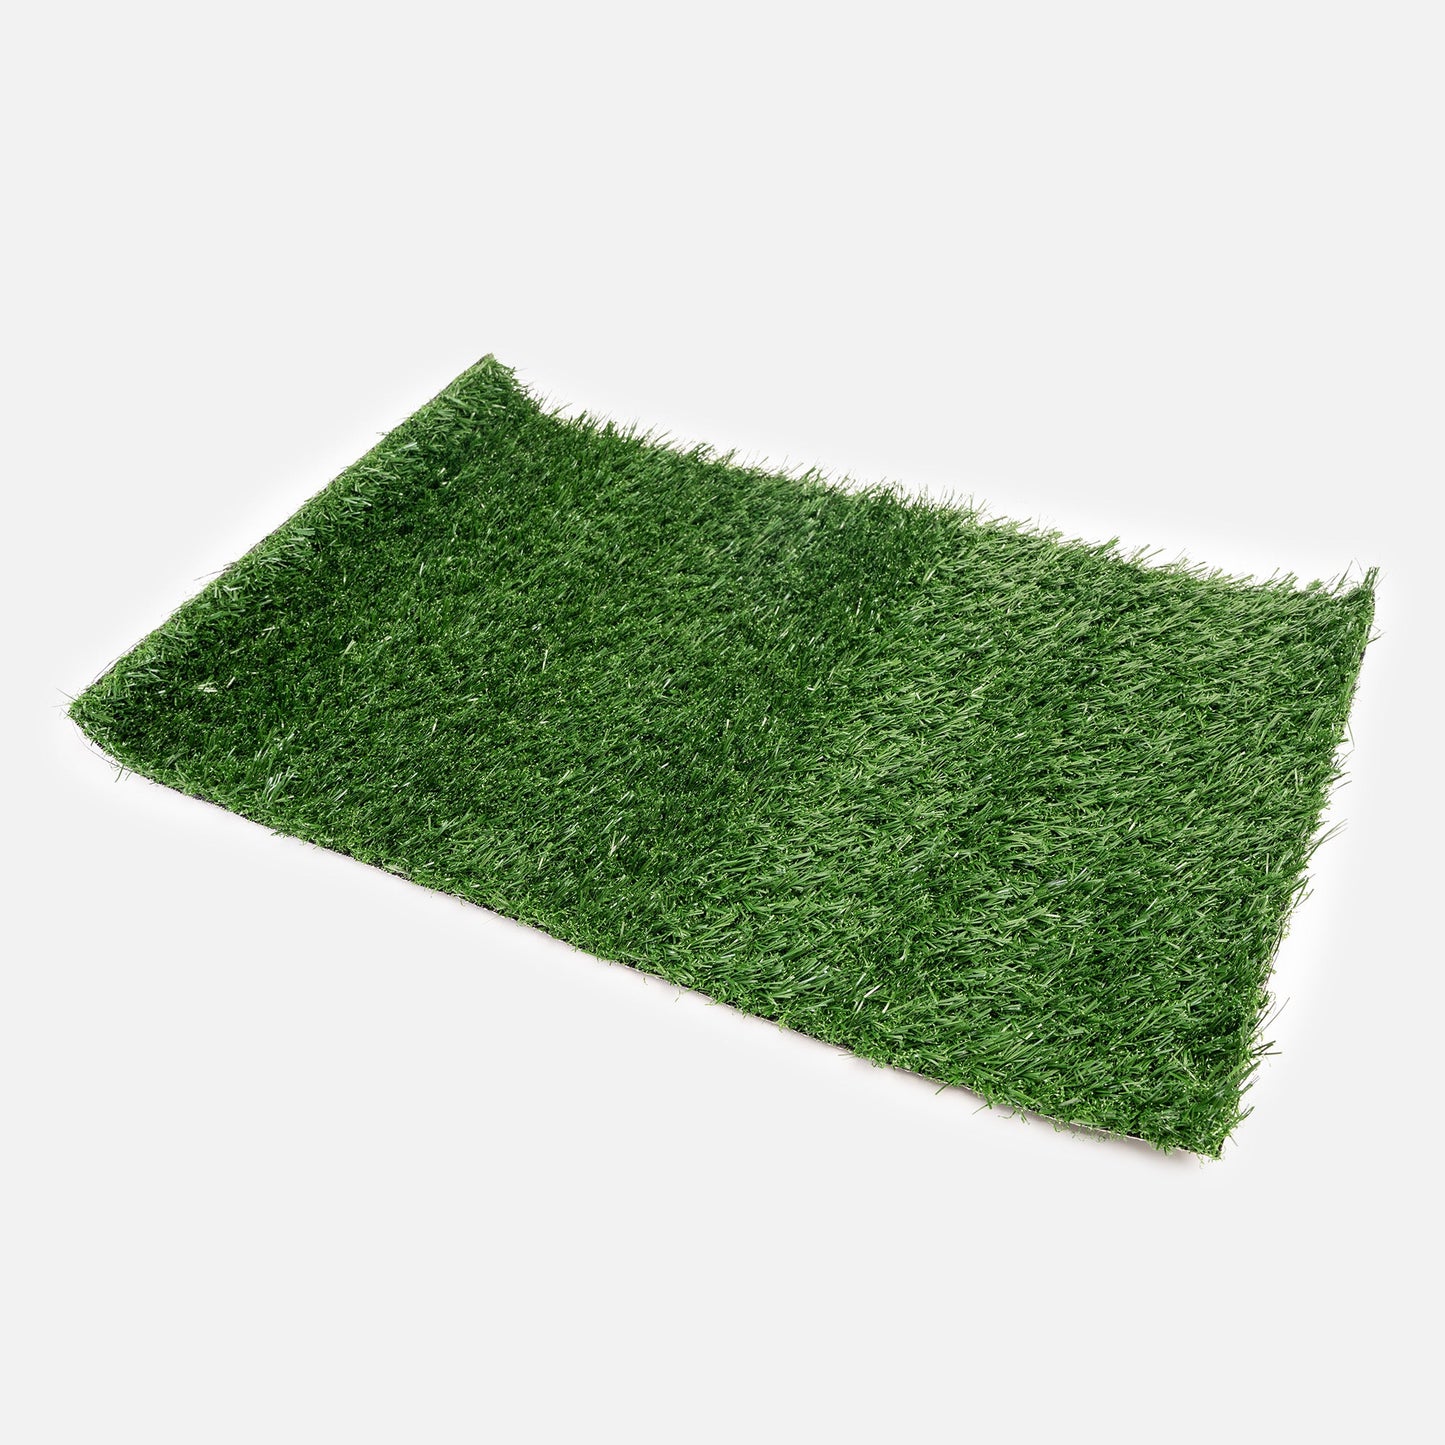 Potty Patch - Dog Turf Replacement